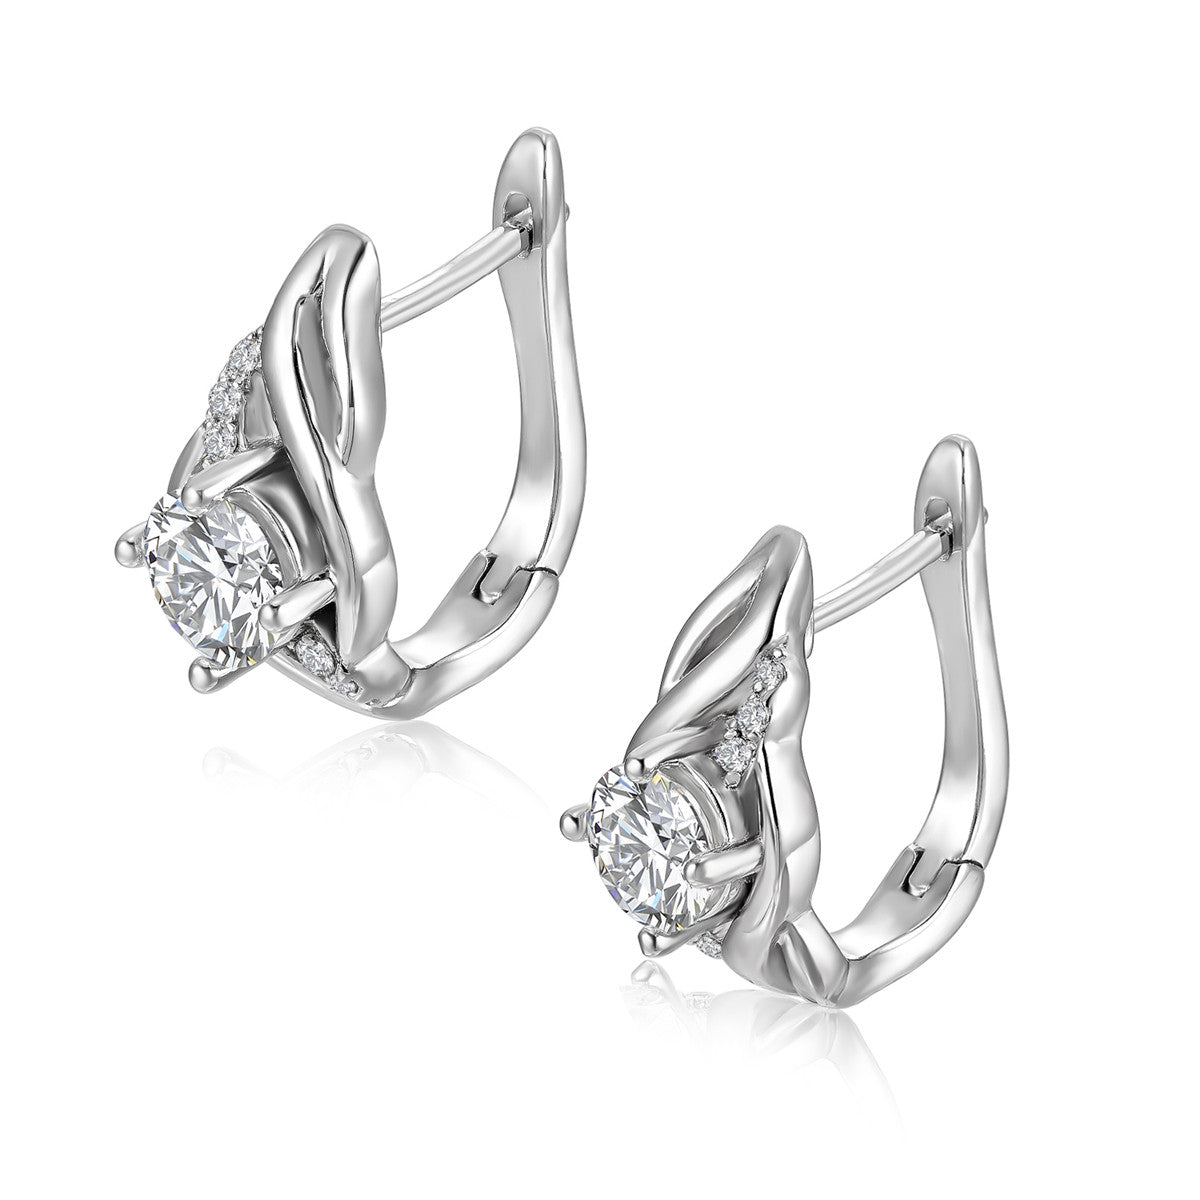 Moissanite by Cate & Chloe Evelyn Sterling Silver Drop Earrings with Moissanite and 5A Cubic Zirconia Crystals